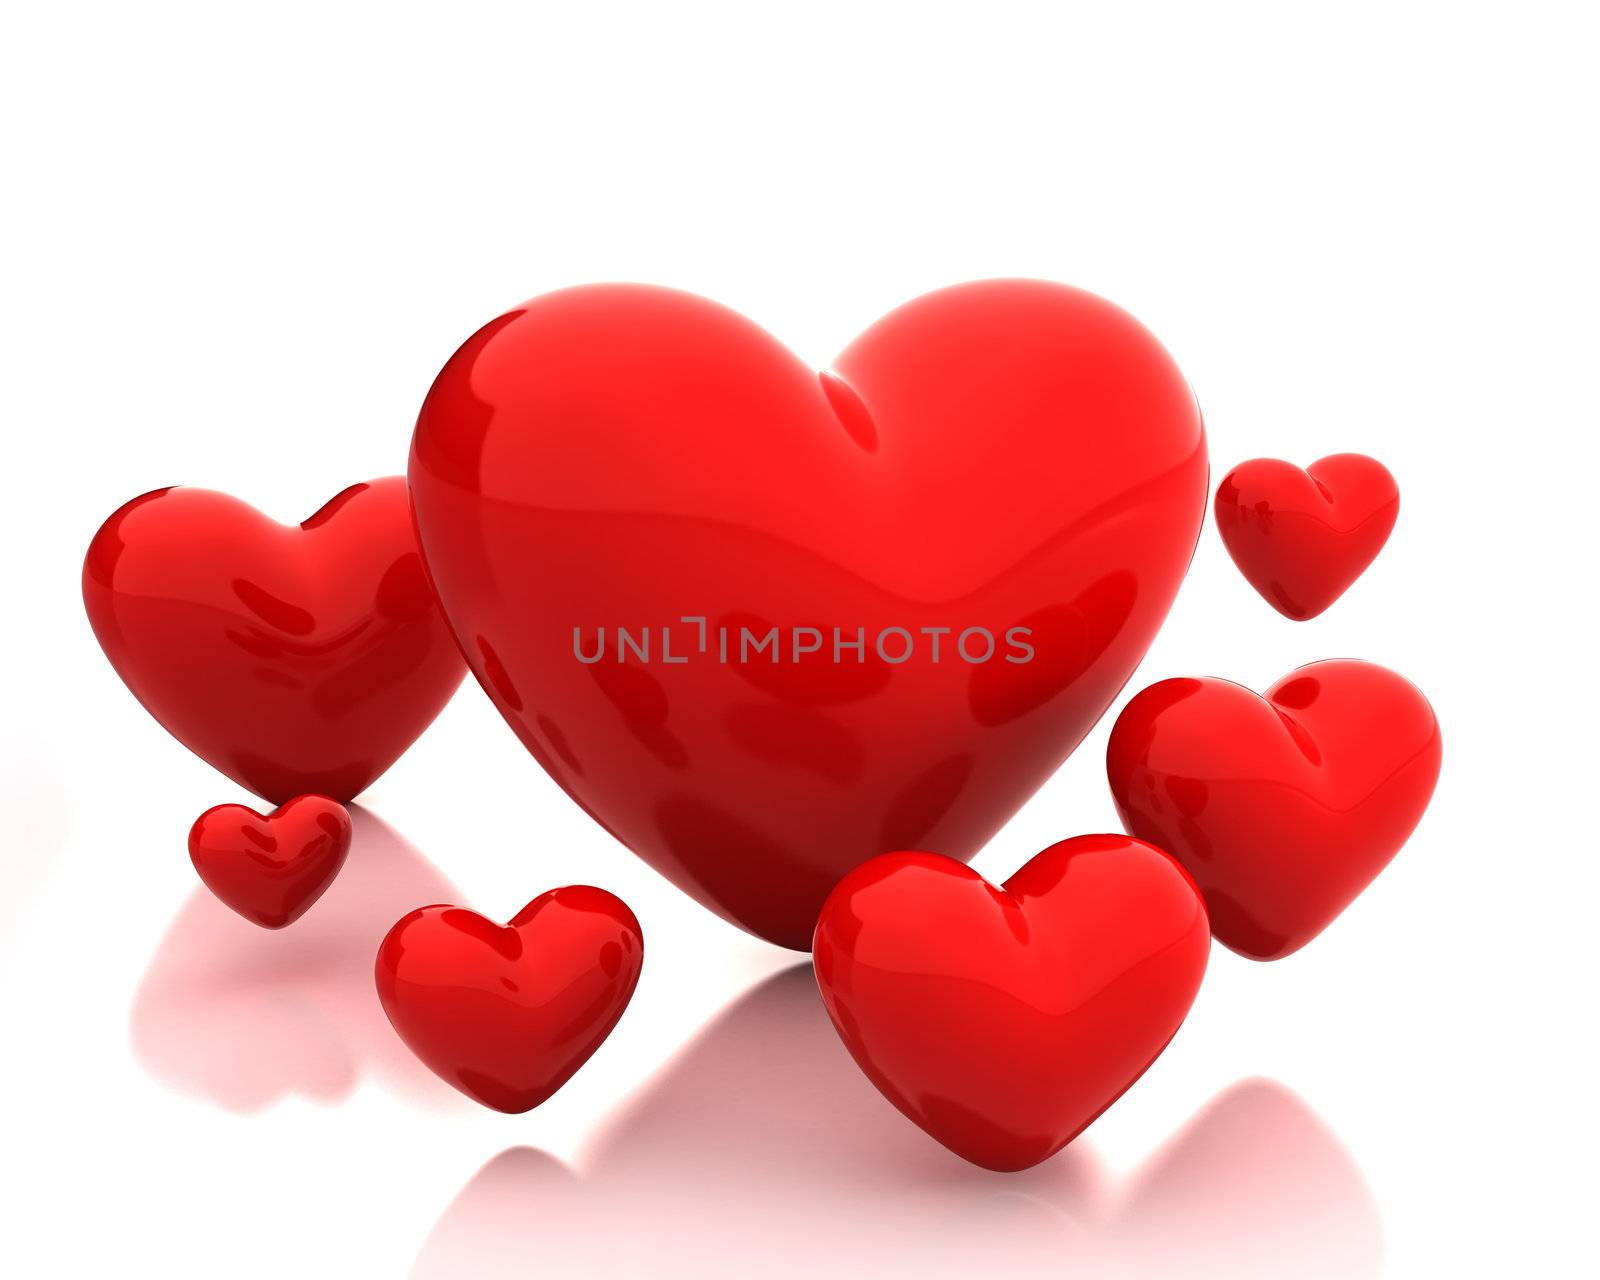 Few red hearts isolated on white background